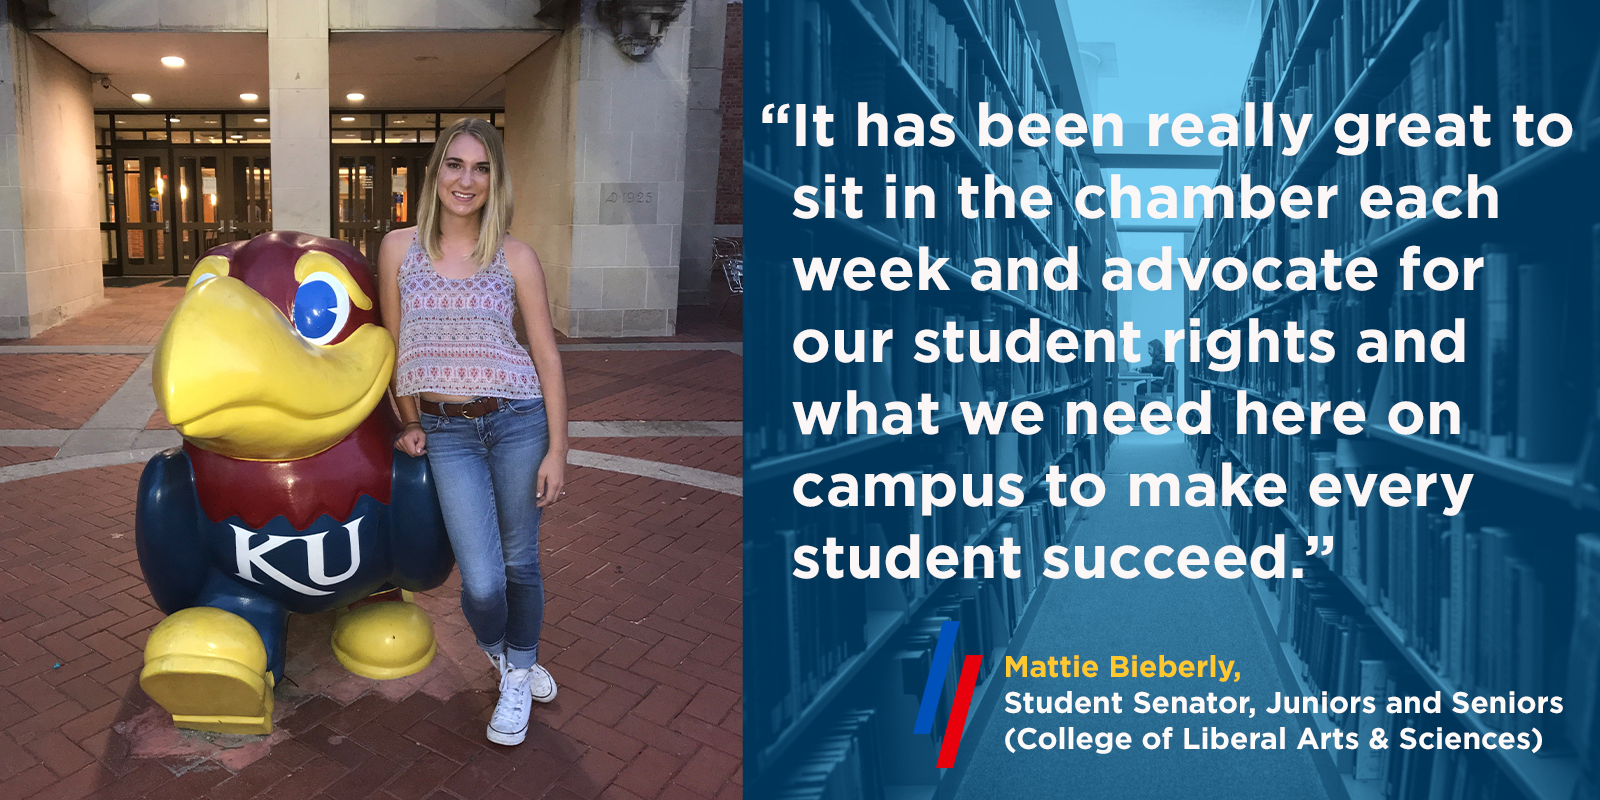 "It has been really great to sit in the chamber each week and advocate for our student rights and what we need here on campus to make every student succeed."